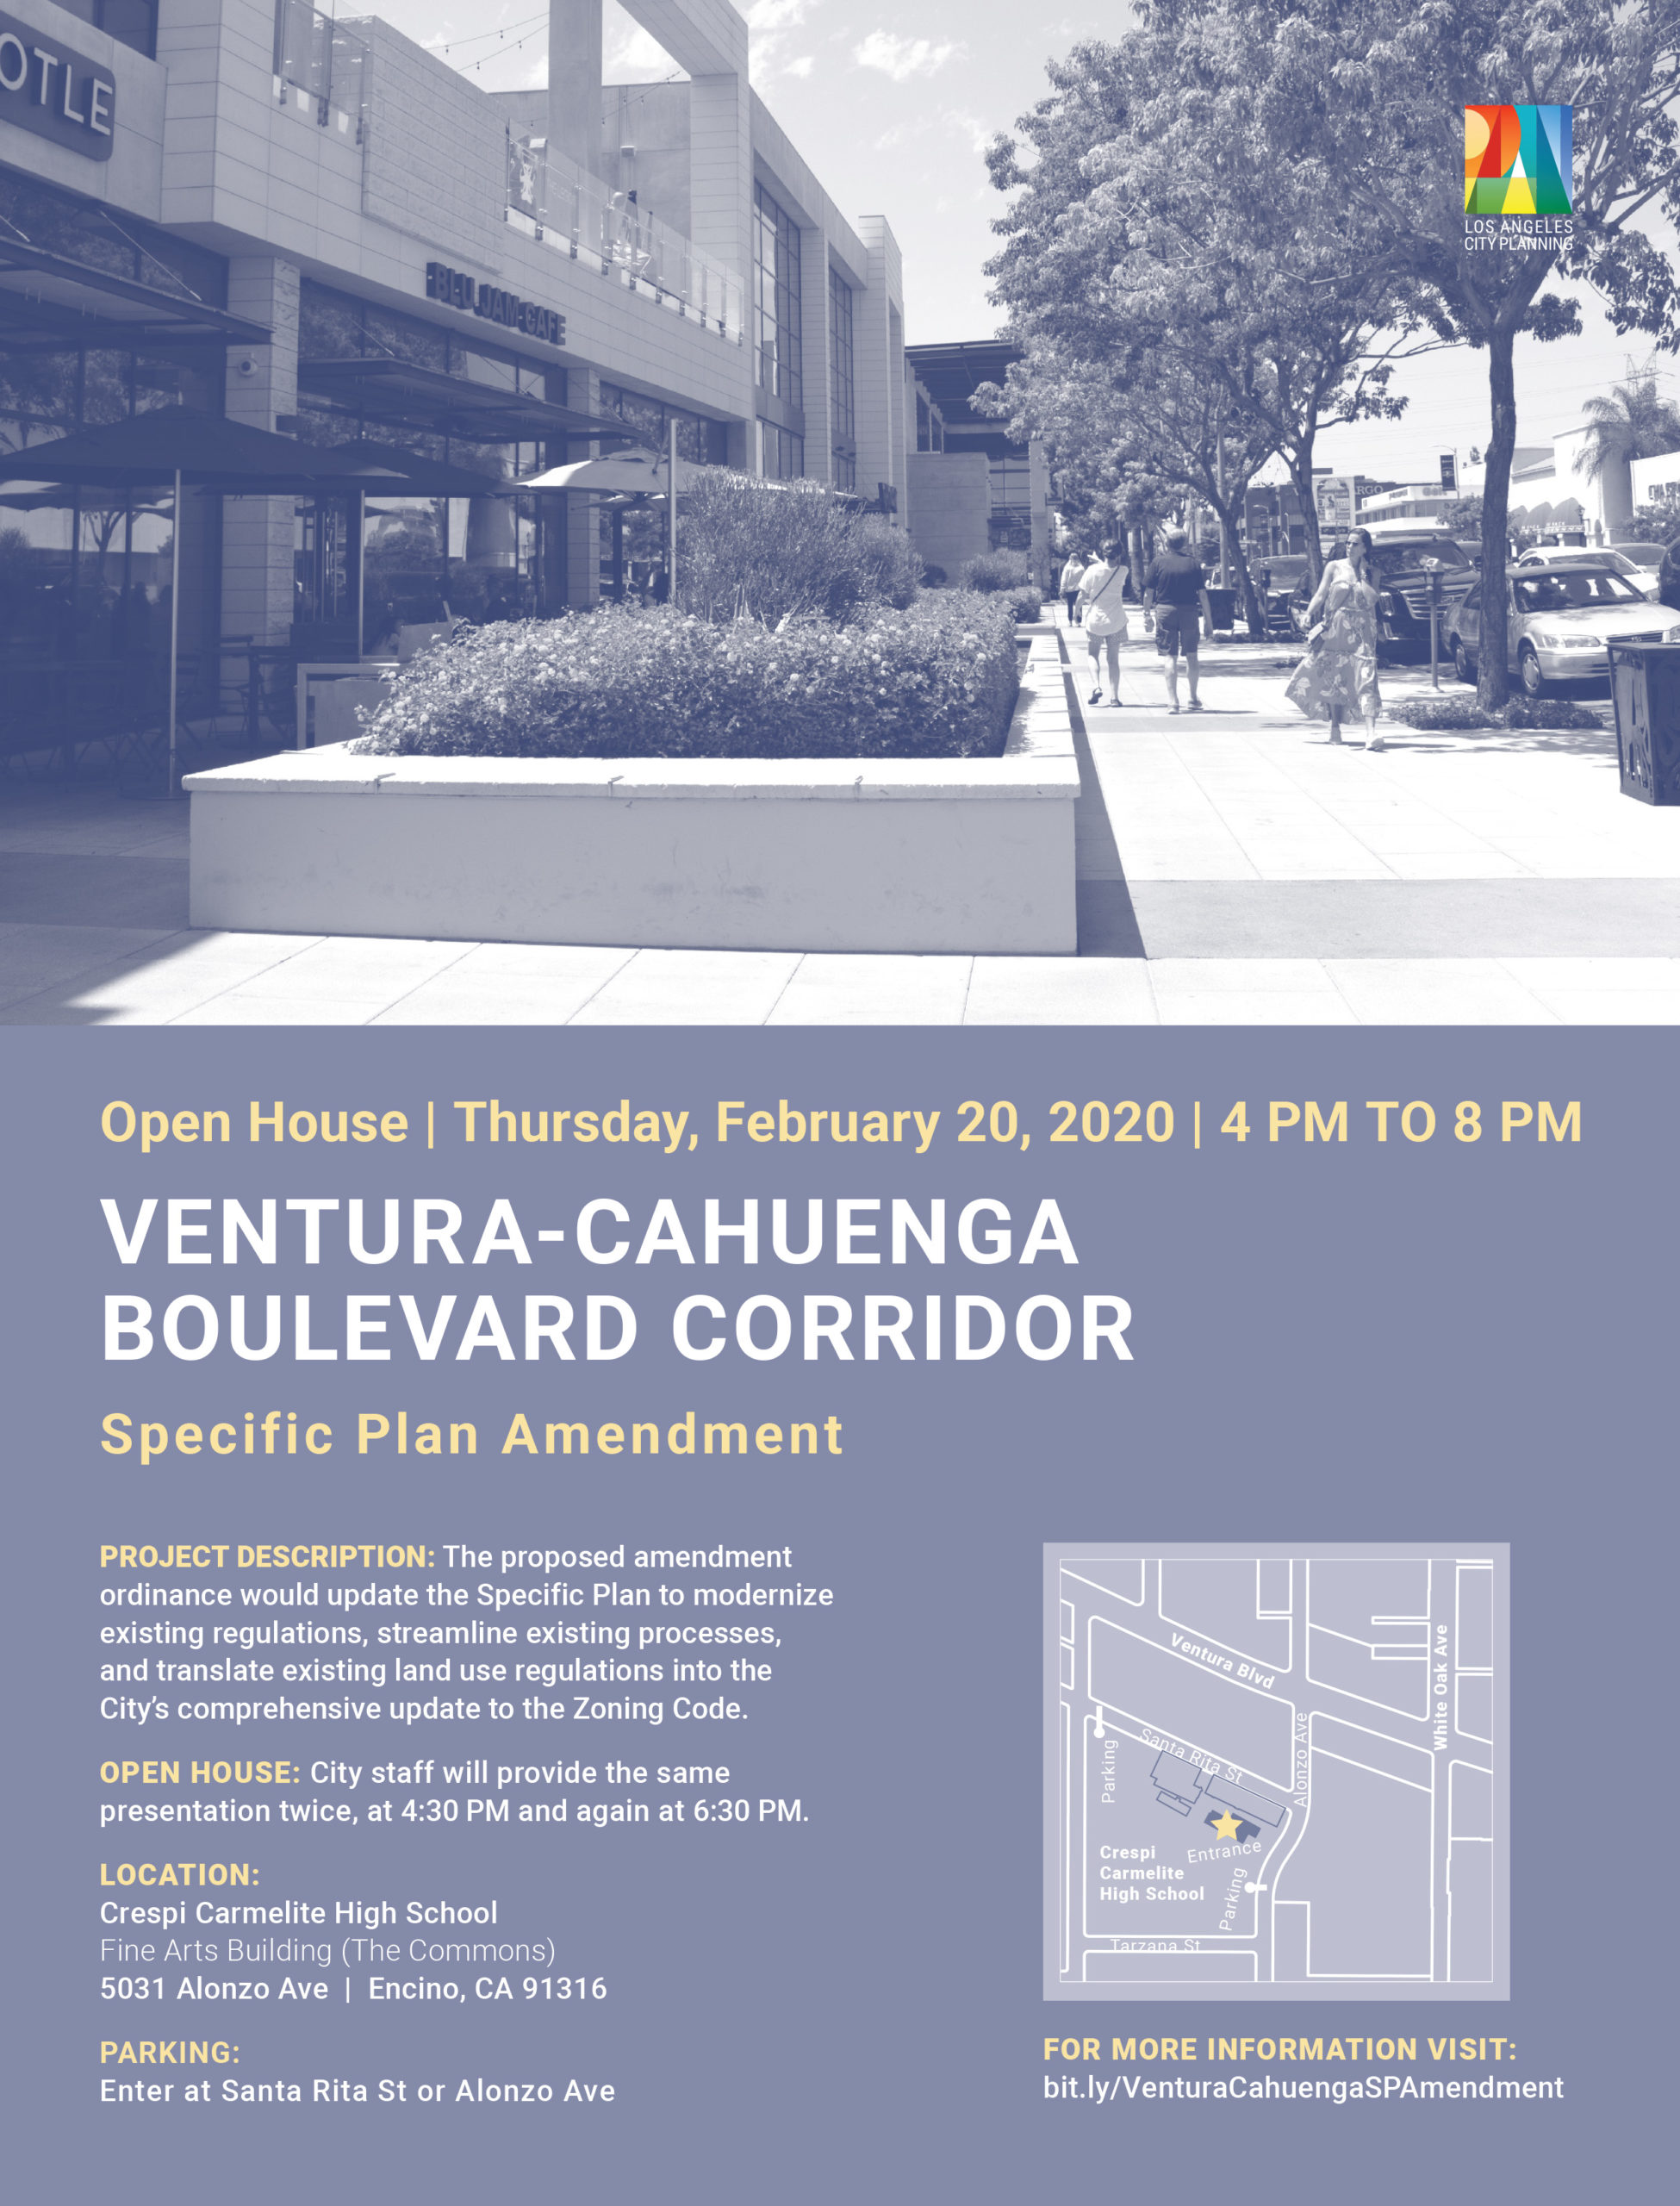 Flyer of City Planning Open House for the Ventura-Cahuenga Boulevards Corridor Specific Plan Amendment